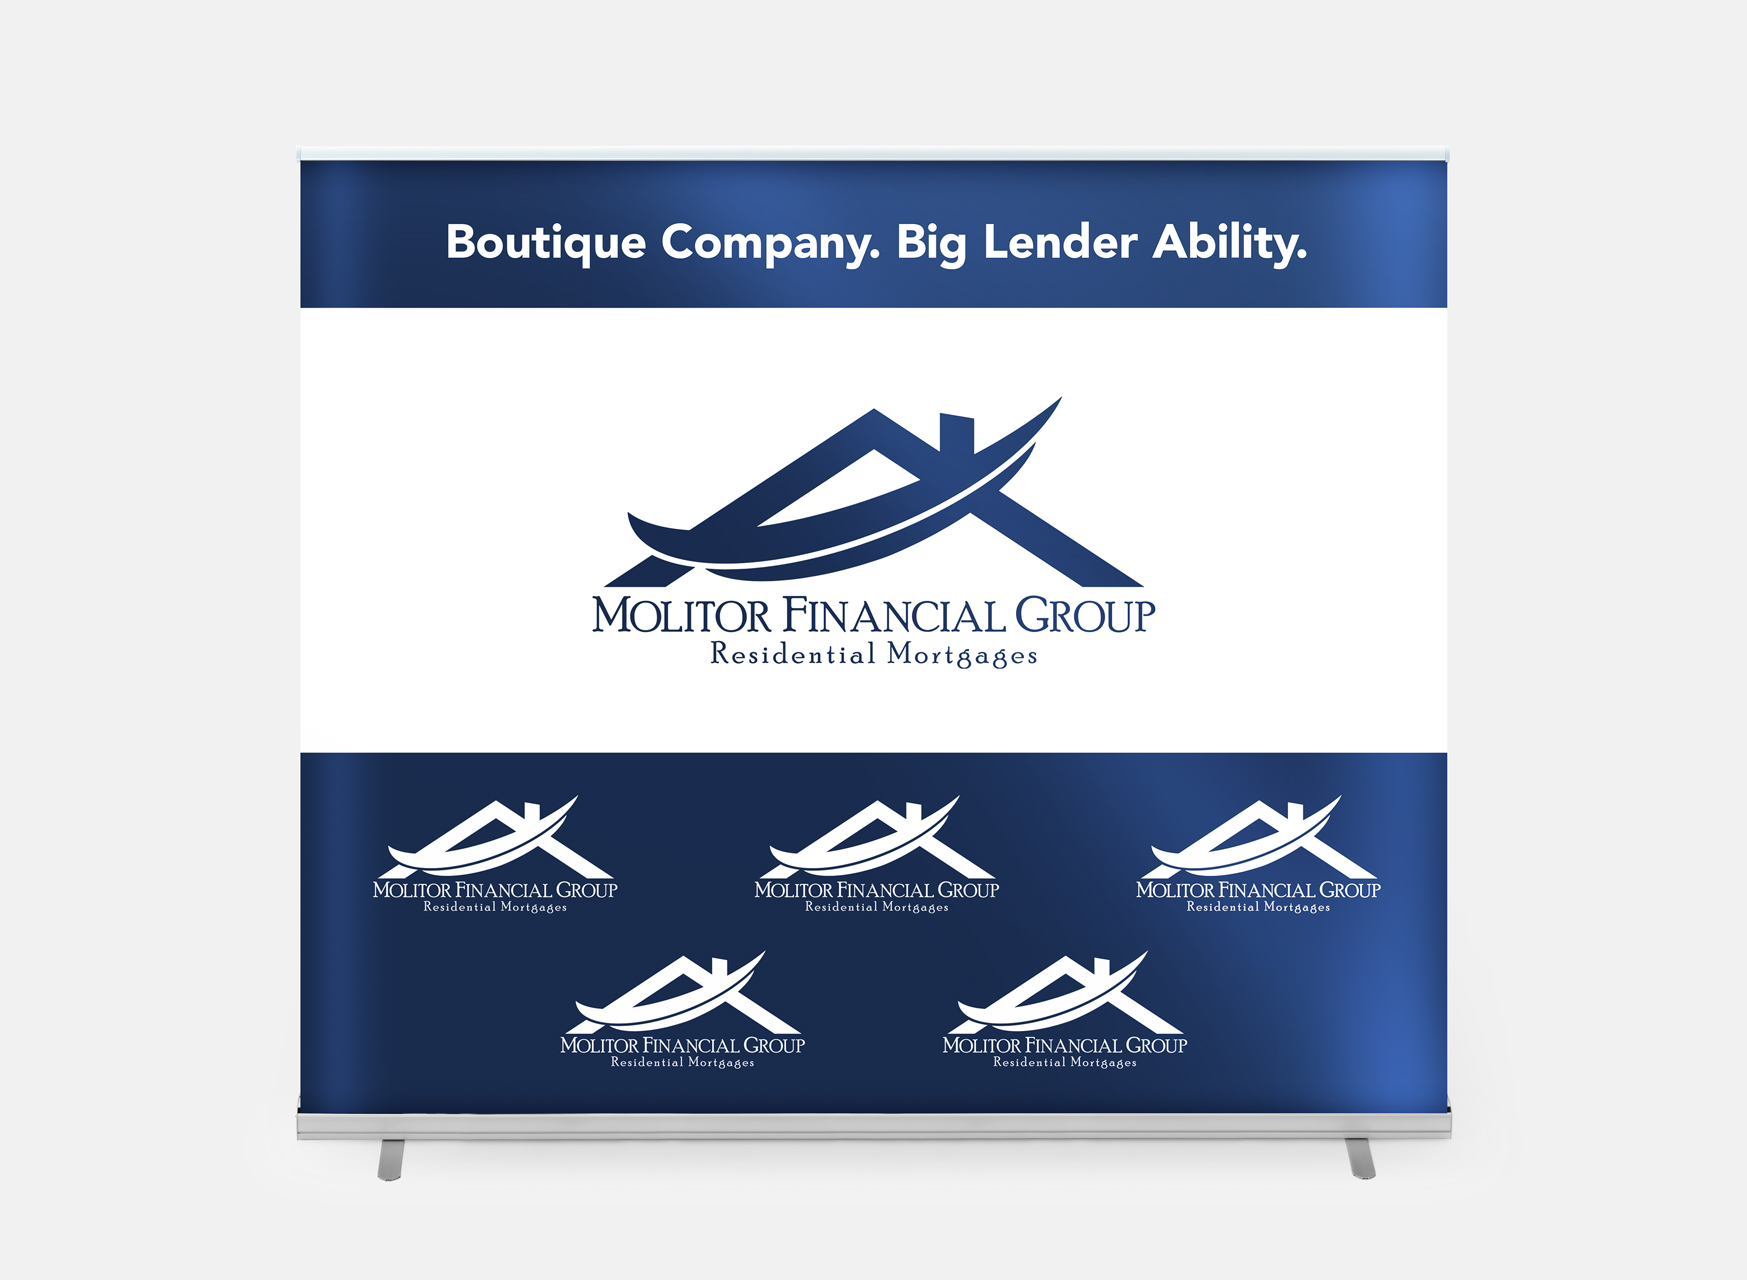 A custom retractable banner printed with a white and navy design and 